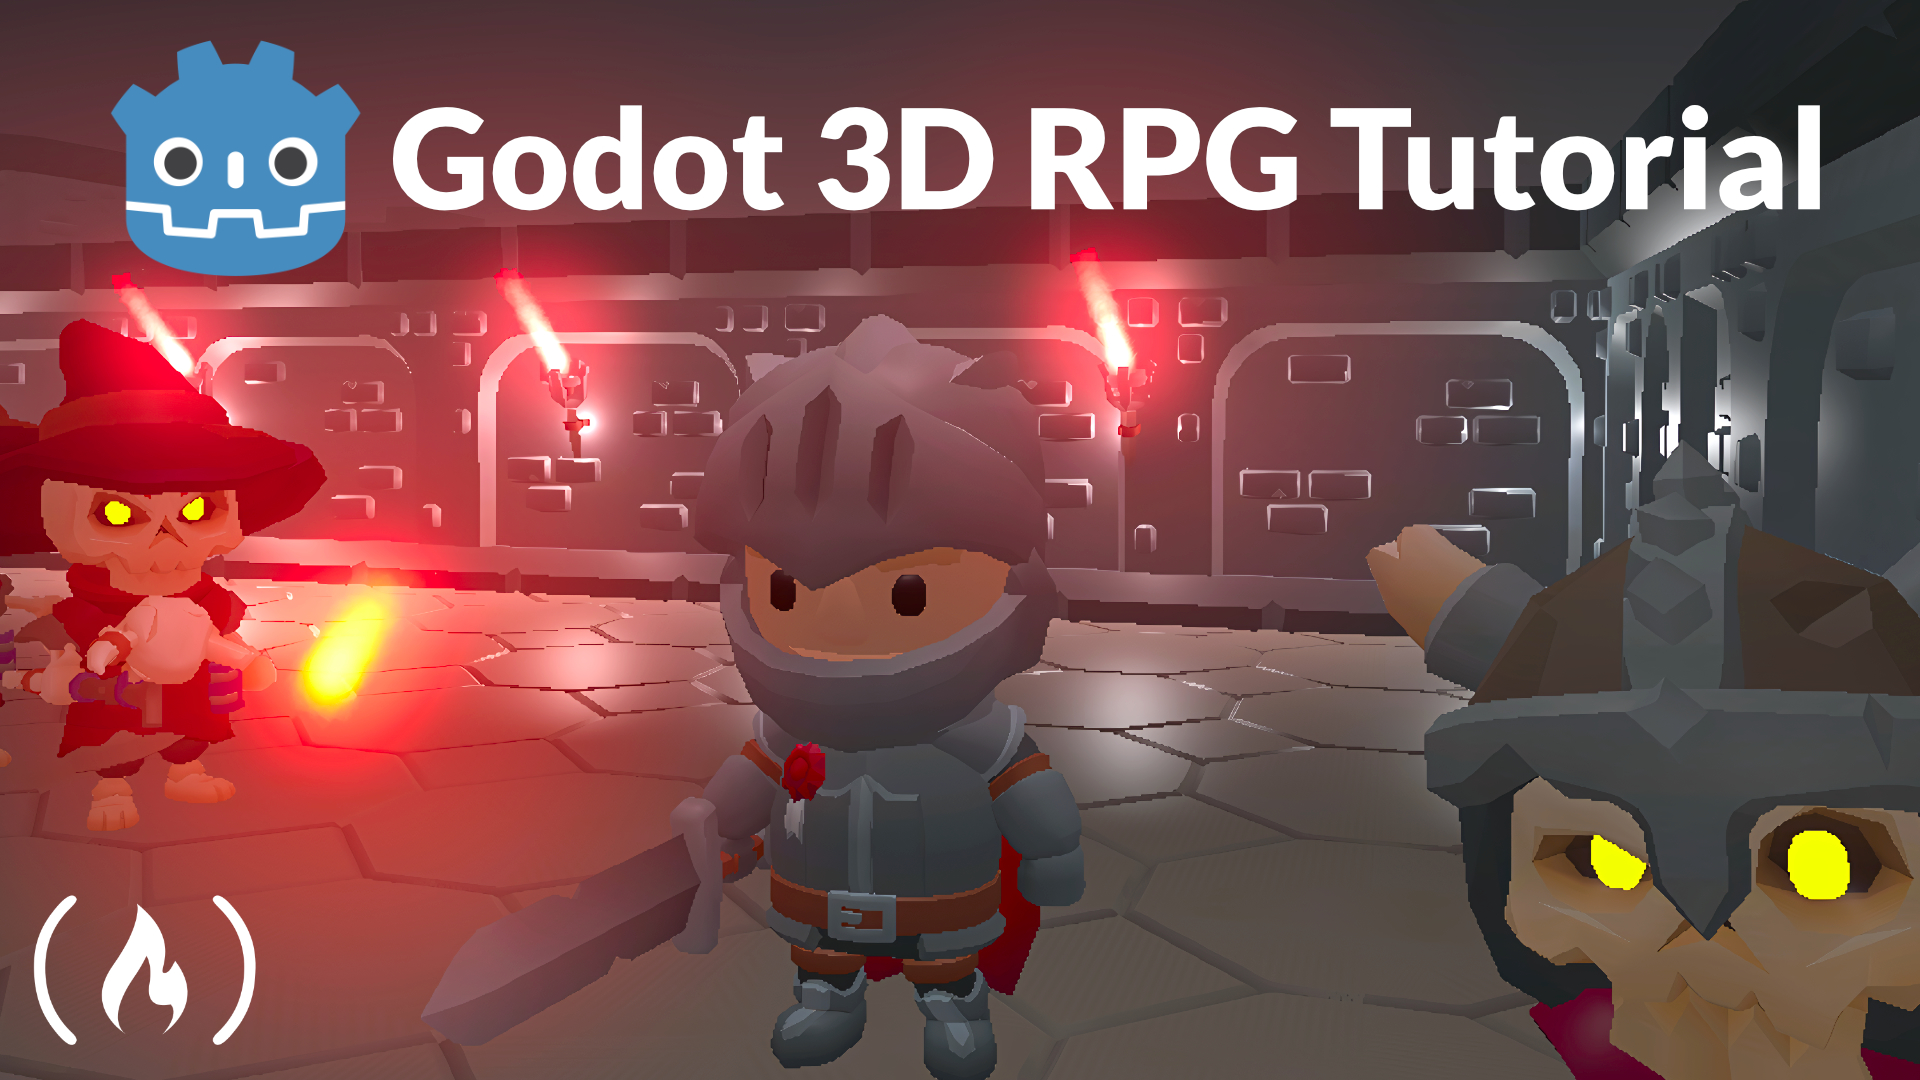 Learn to Create a 3D RPG Game with Godot